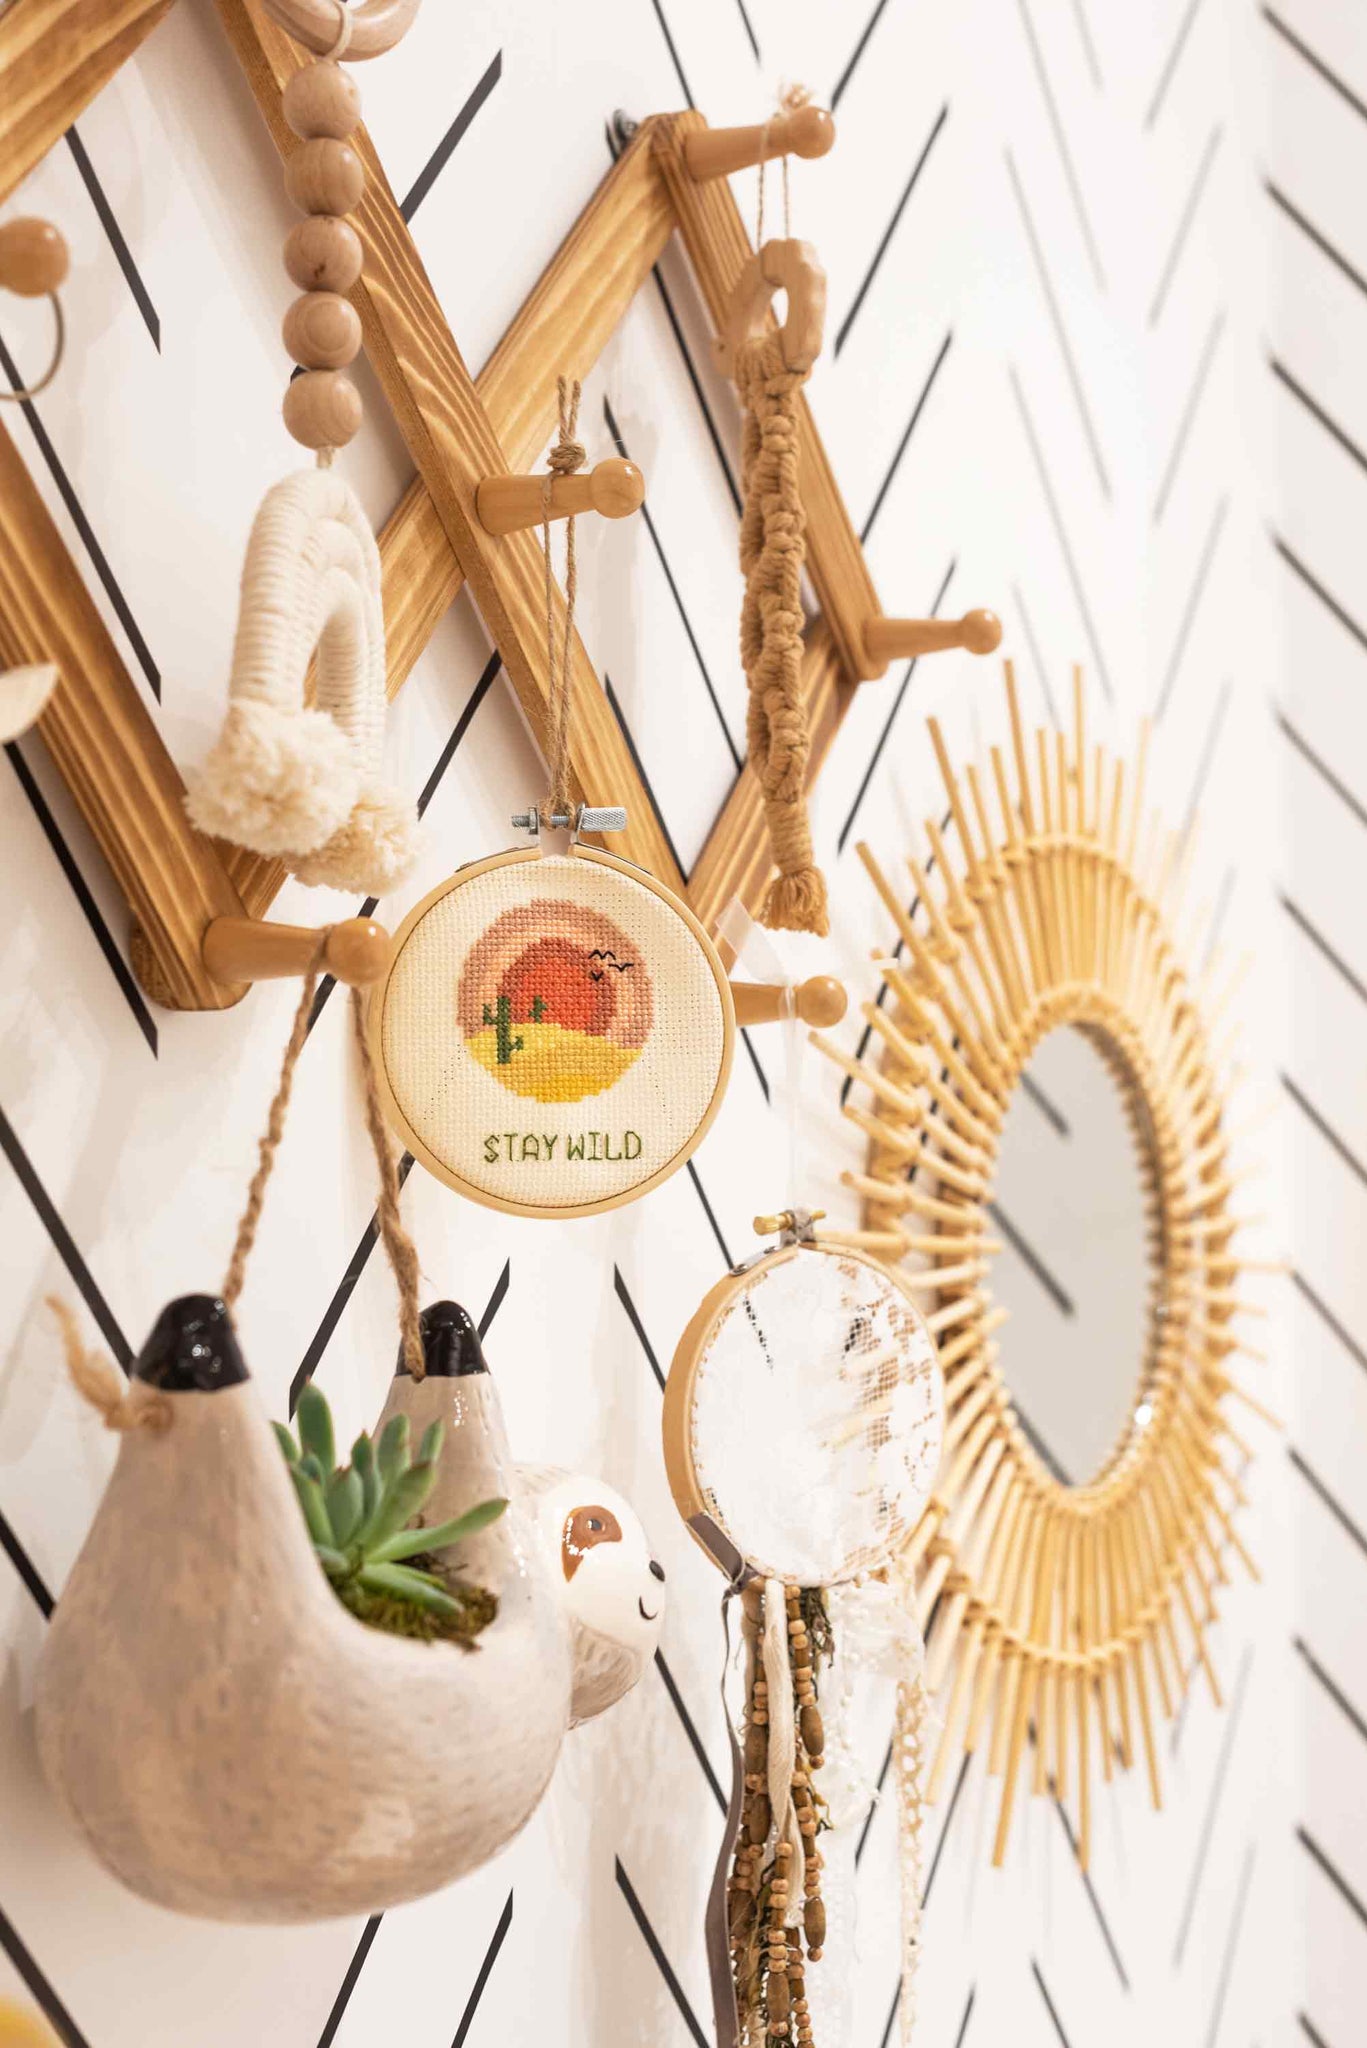 Hanging clothing rack in nursery interior with baby sloth planter and rainbow theme decor